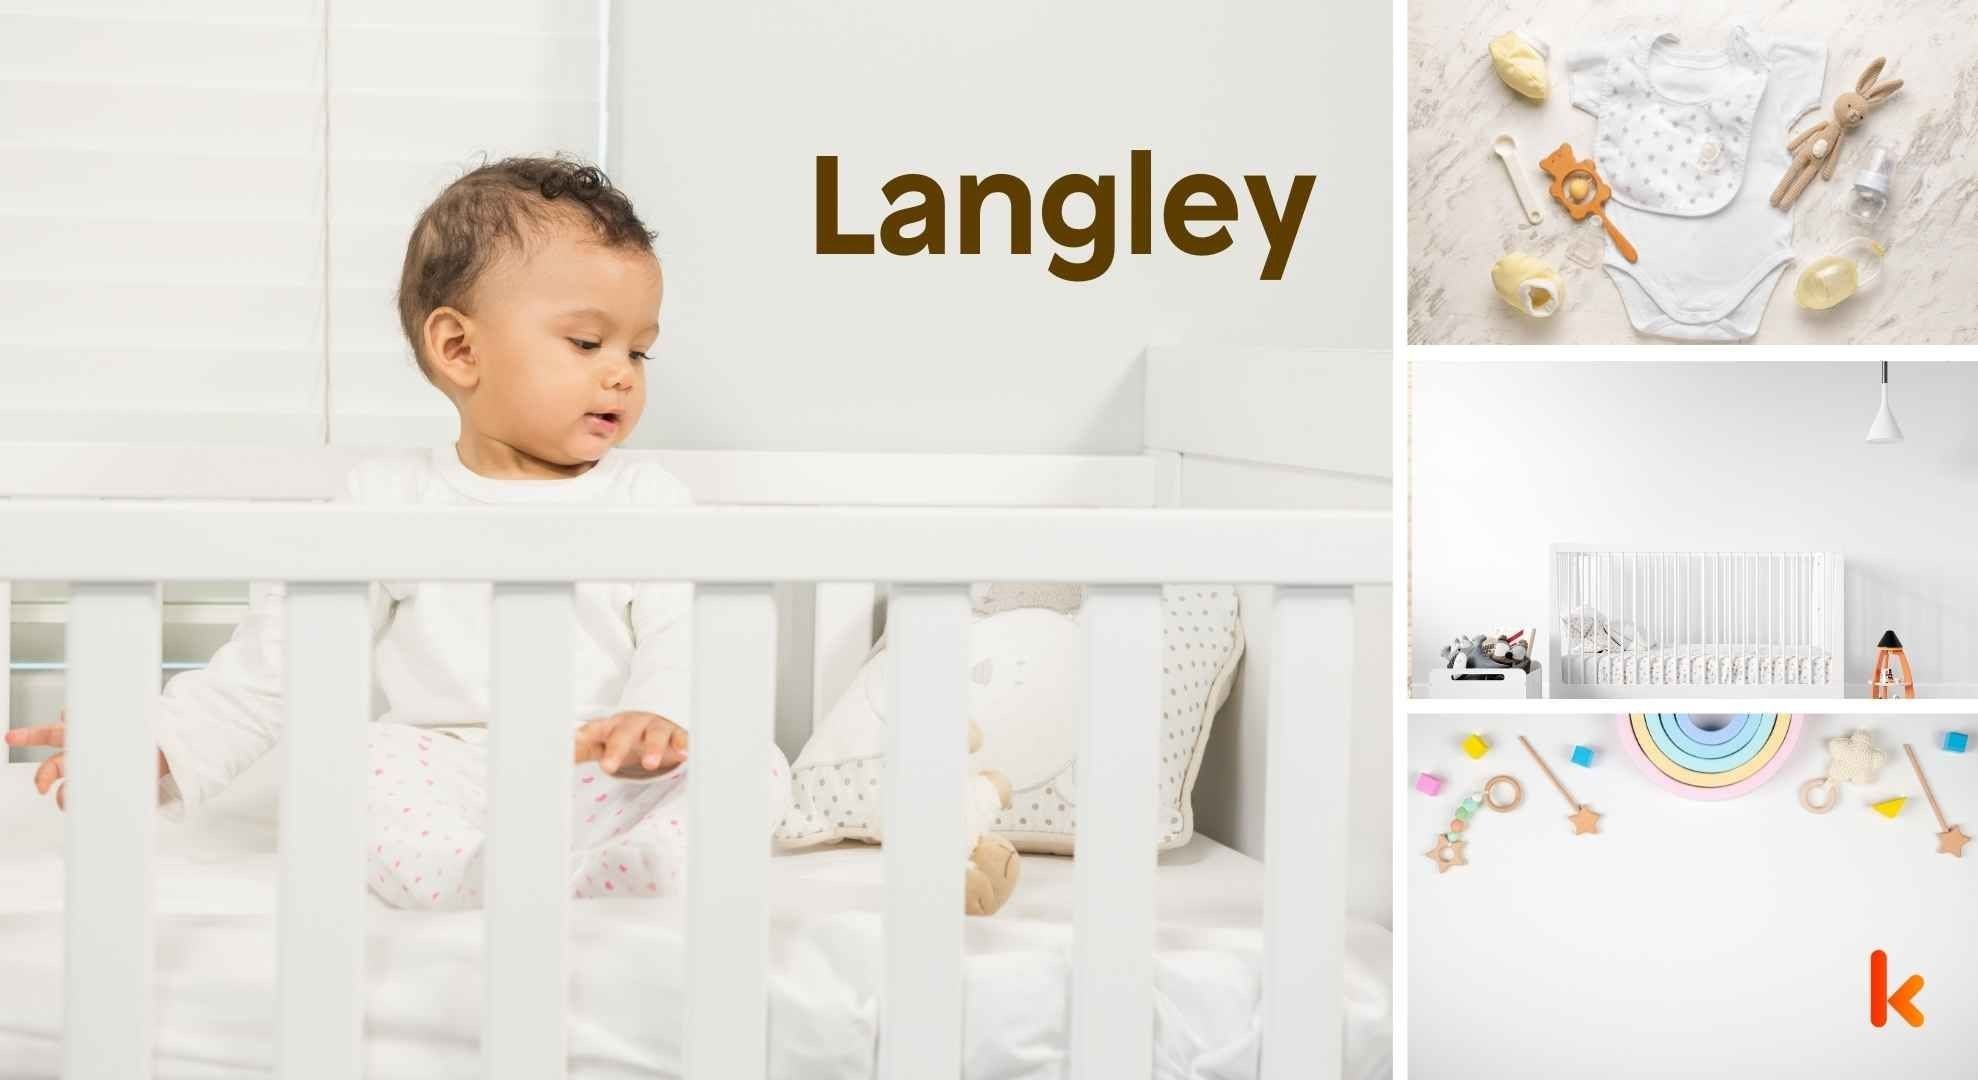 Meaning of the name Langley